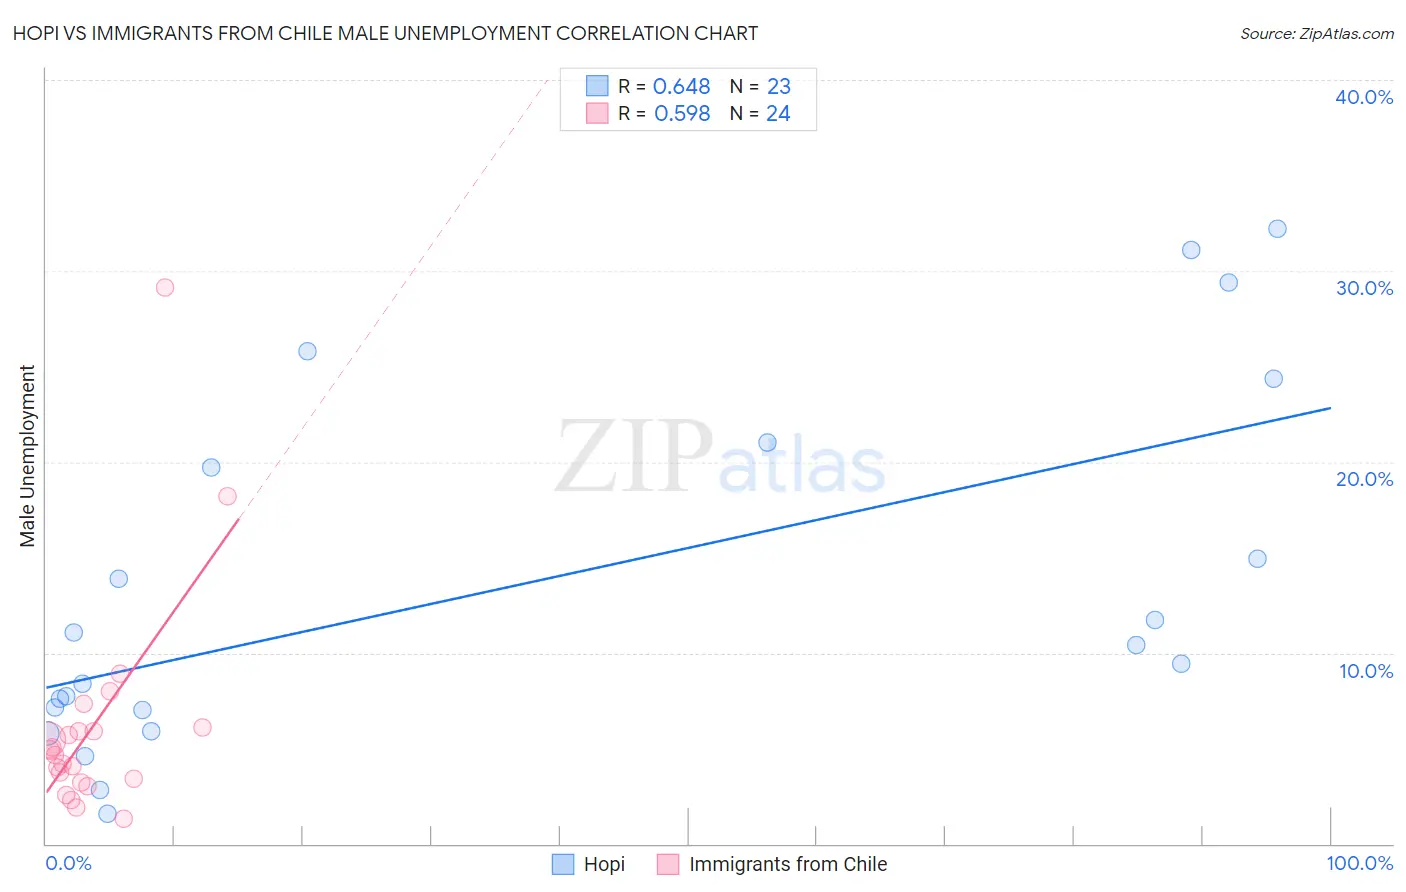 Hopi vs Immigrants from Chile Male Unemployment